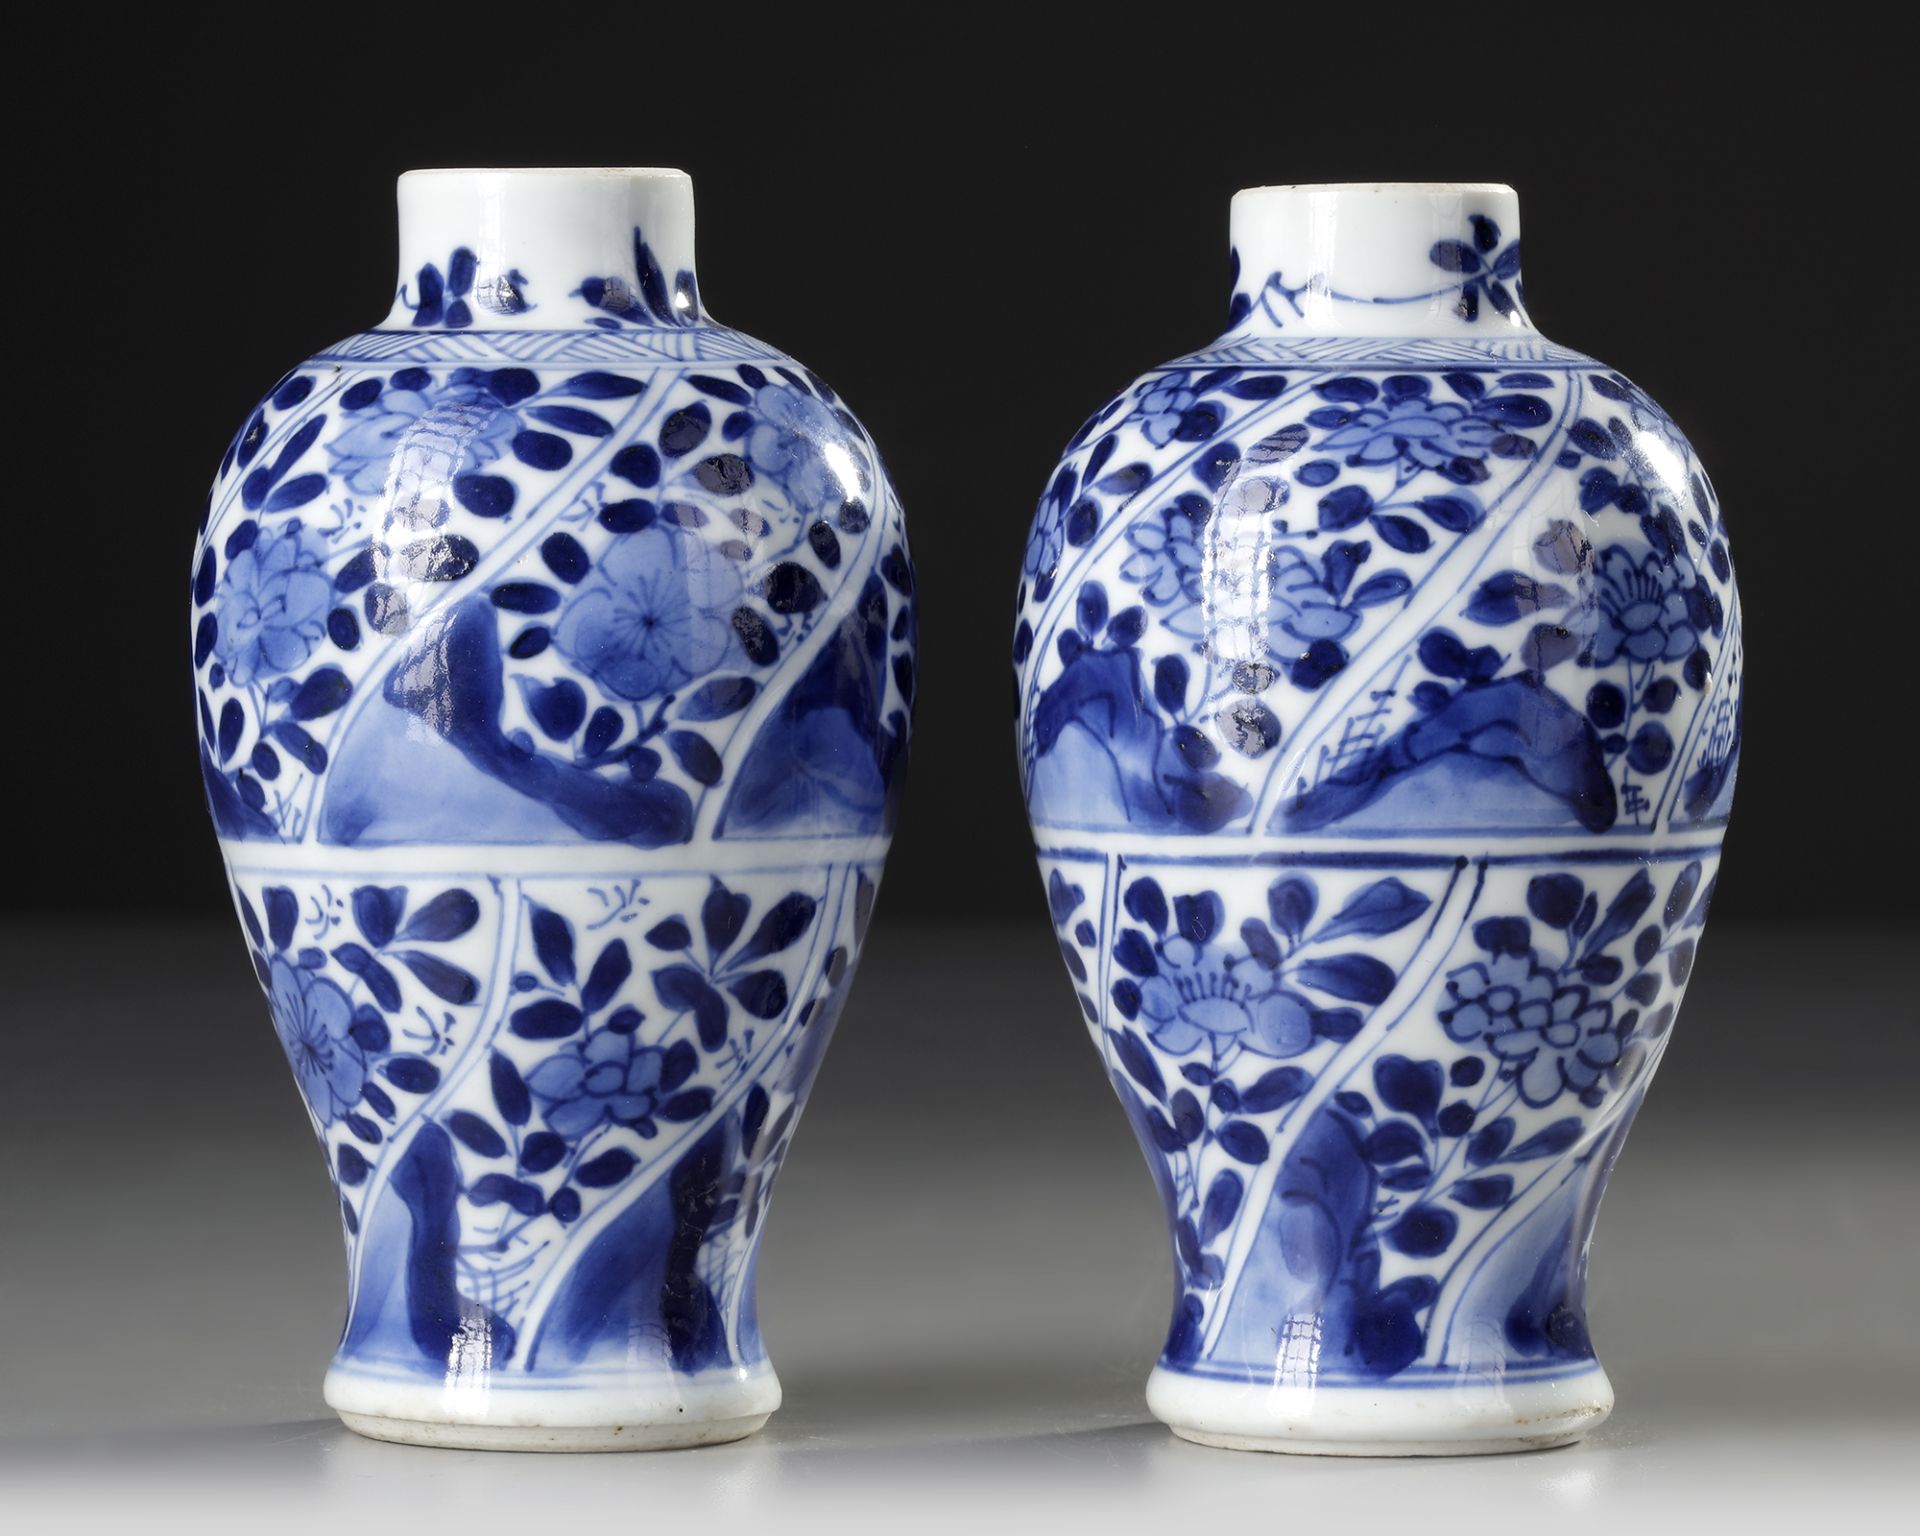 A PAIR OF CHINESE BLUE AND WHITE VASES, KANGXI PERIOD (1662-1722)